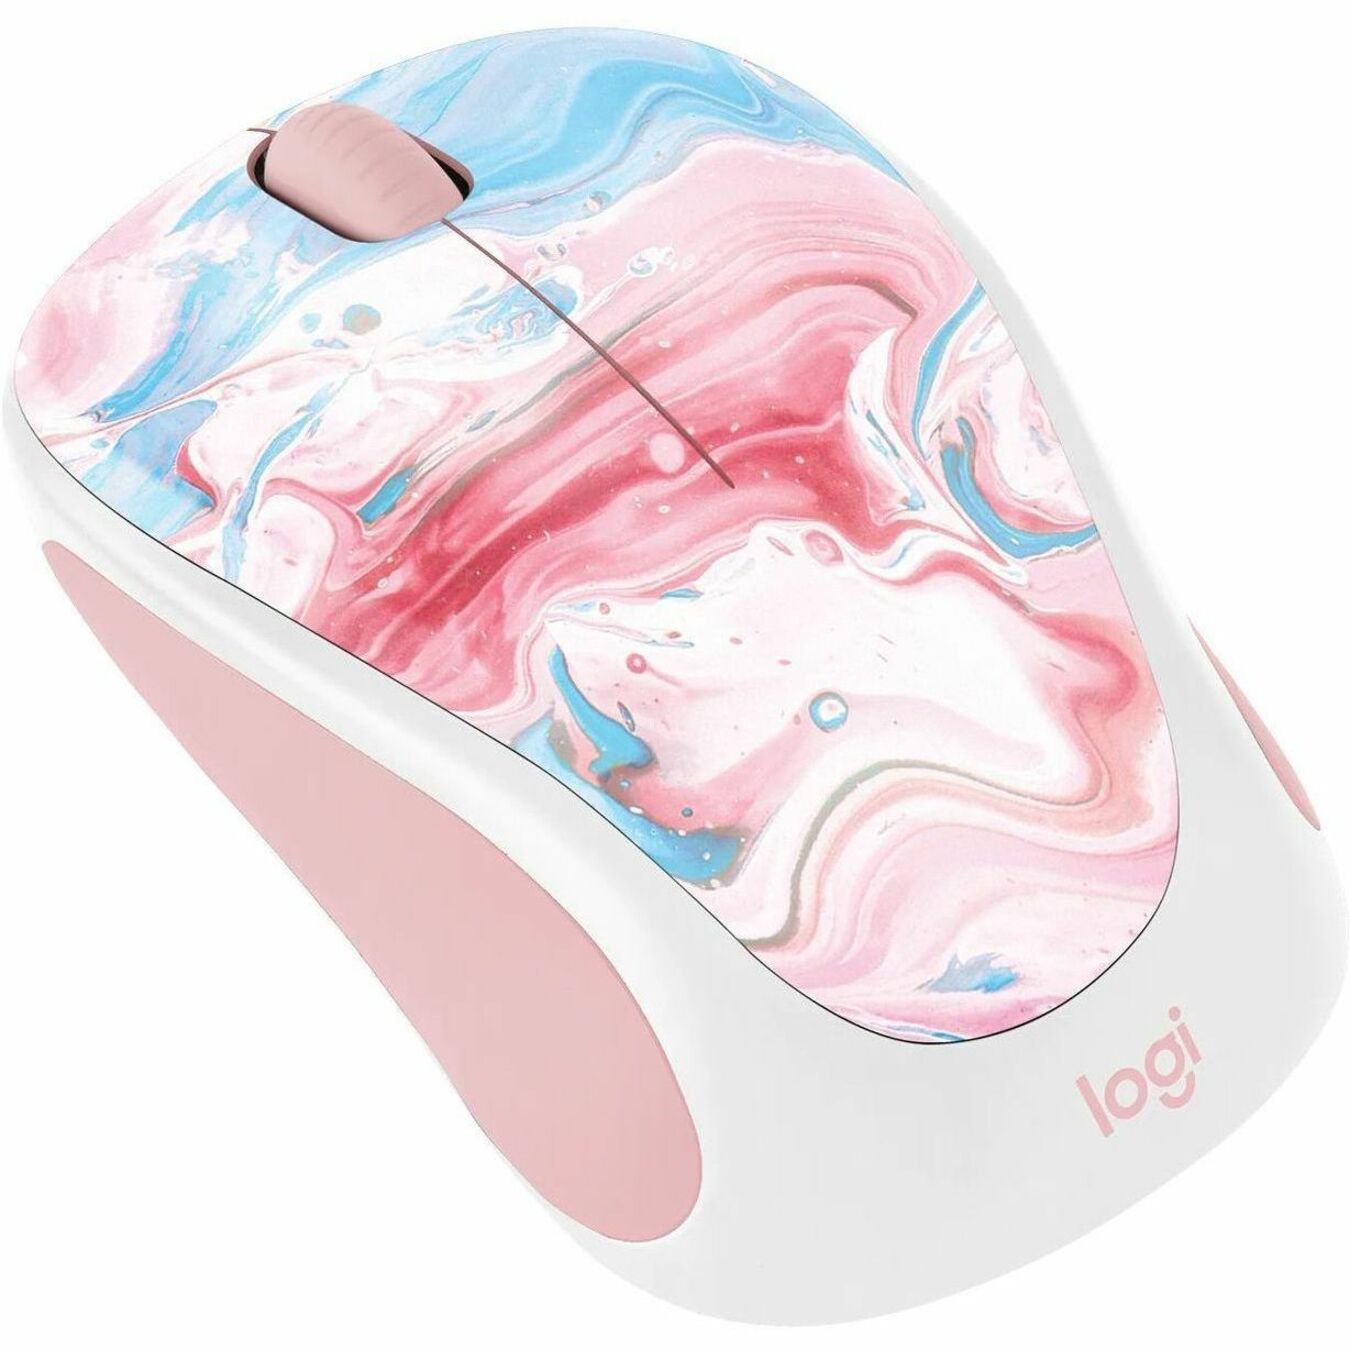 Logitech 910-007055 Design Collection Limited Edition Wireless Mouse, Ergonomic Fit, Small Size, Cotton Candy Design